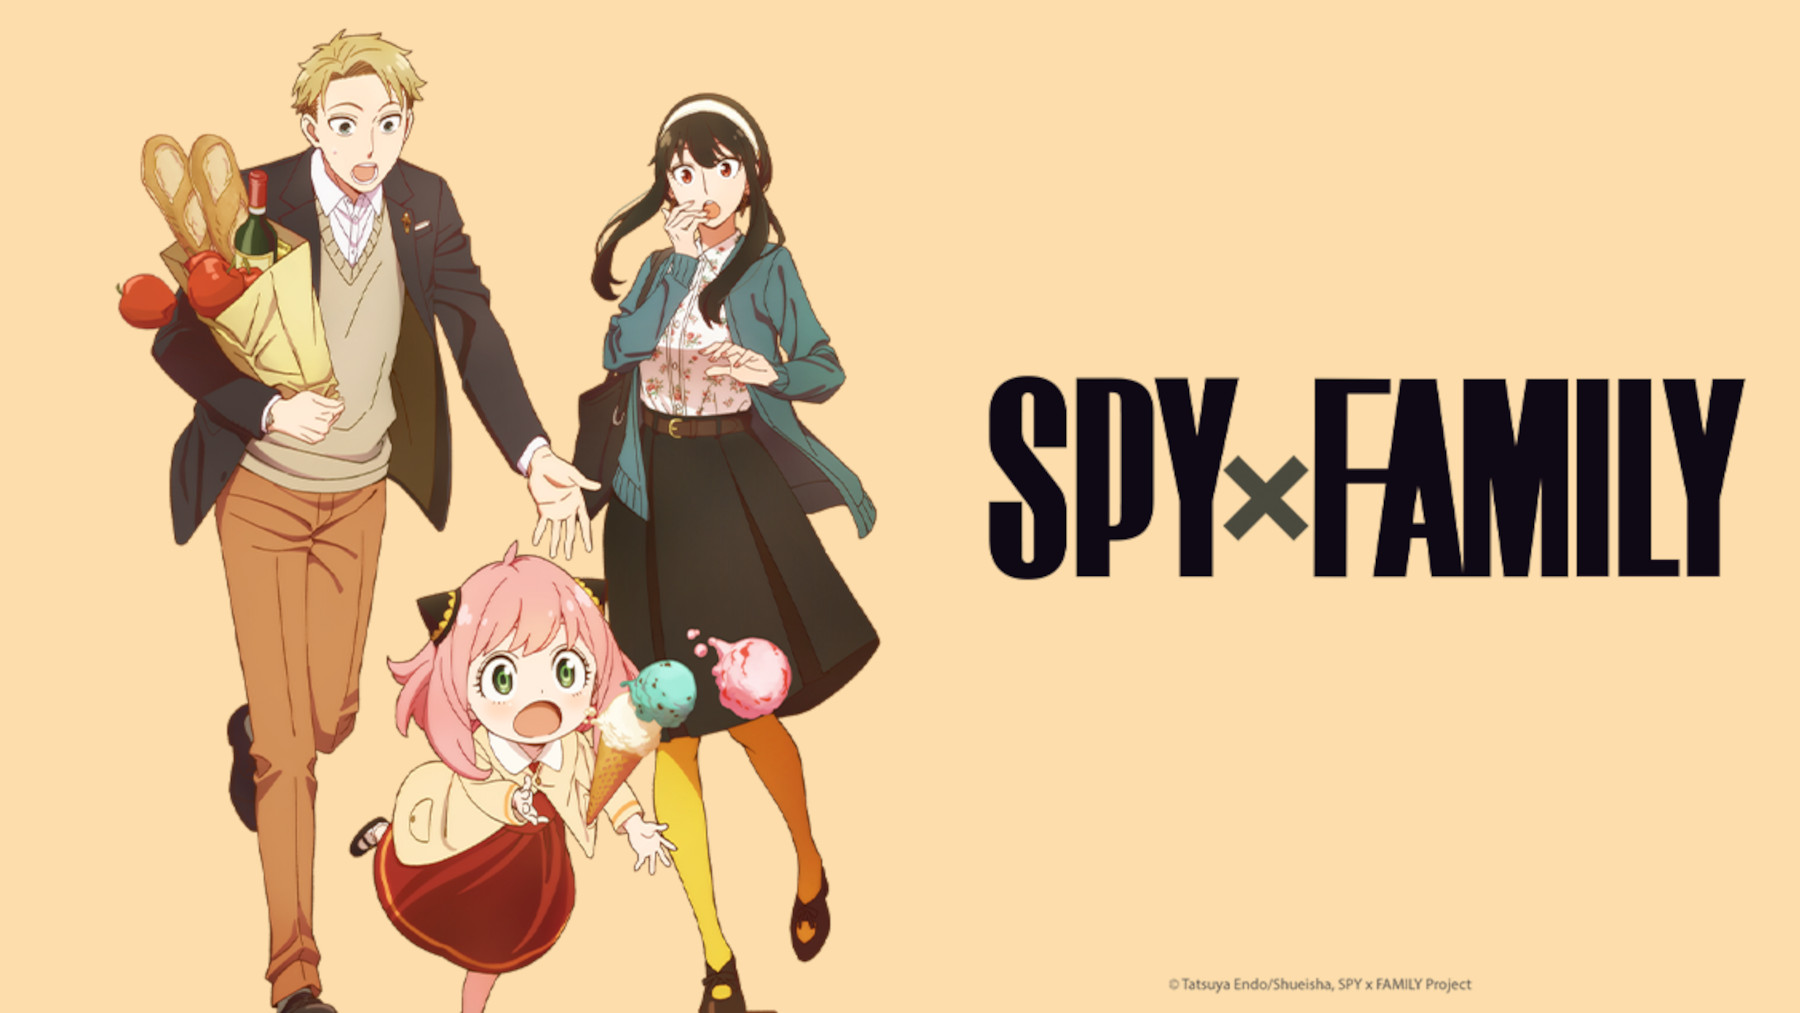 SPY x FAMILY Part 2 Episode 4 Release Date and Time on Crunchyroll -  GameRevolution